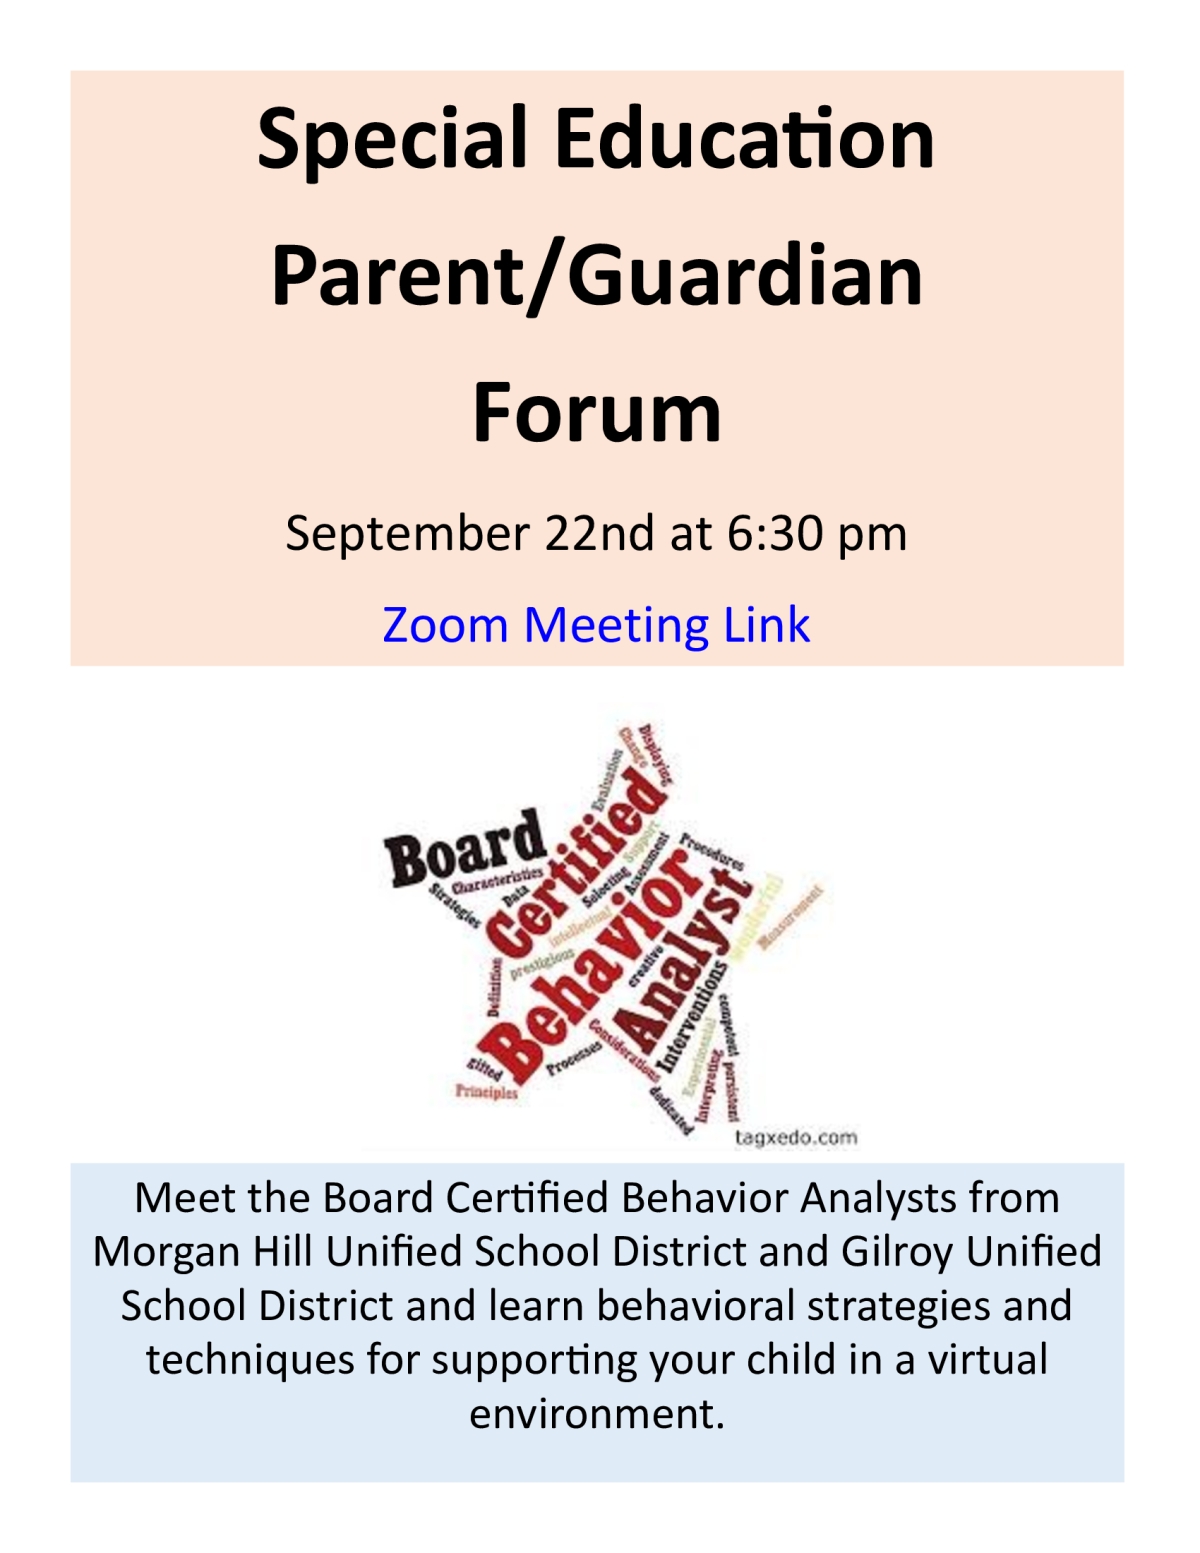 Image of a flyer titled Special Education/Guardian Forum